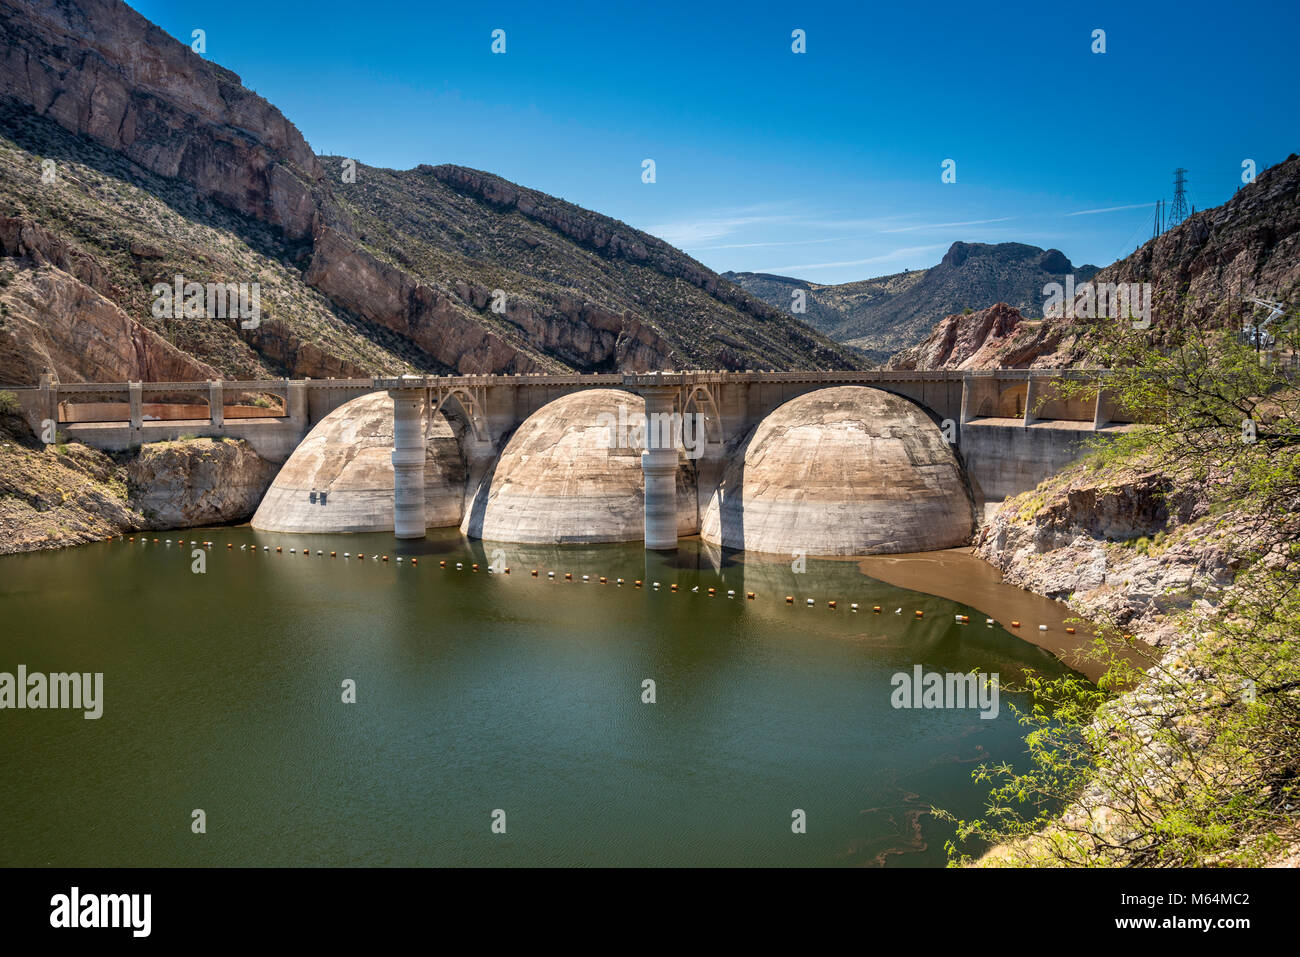 Coolidge Dam, a reinforced concrete multiple dome and buttress dam on Gila River, San Carlos Reservoir, San Carlos Indian Reservation, Arizona, USA Stock Photo